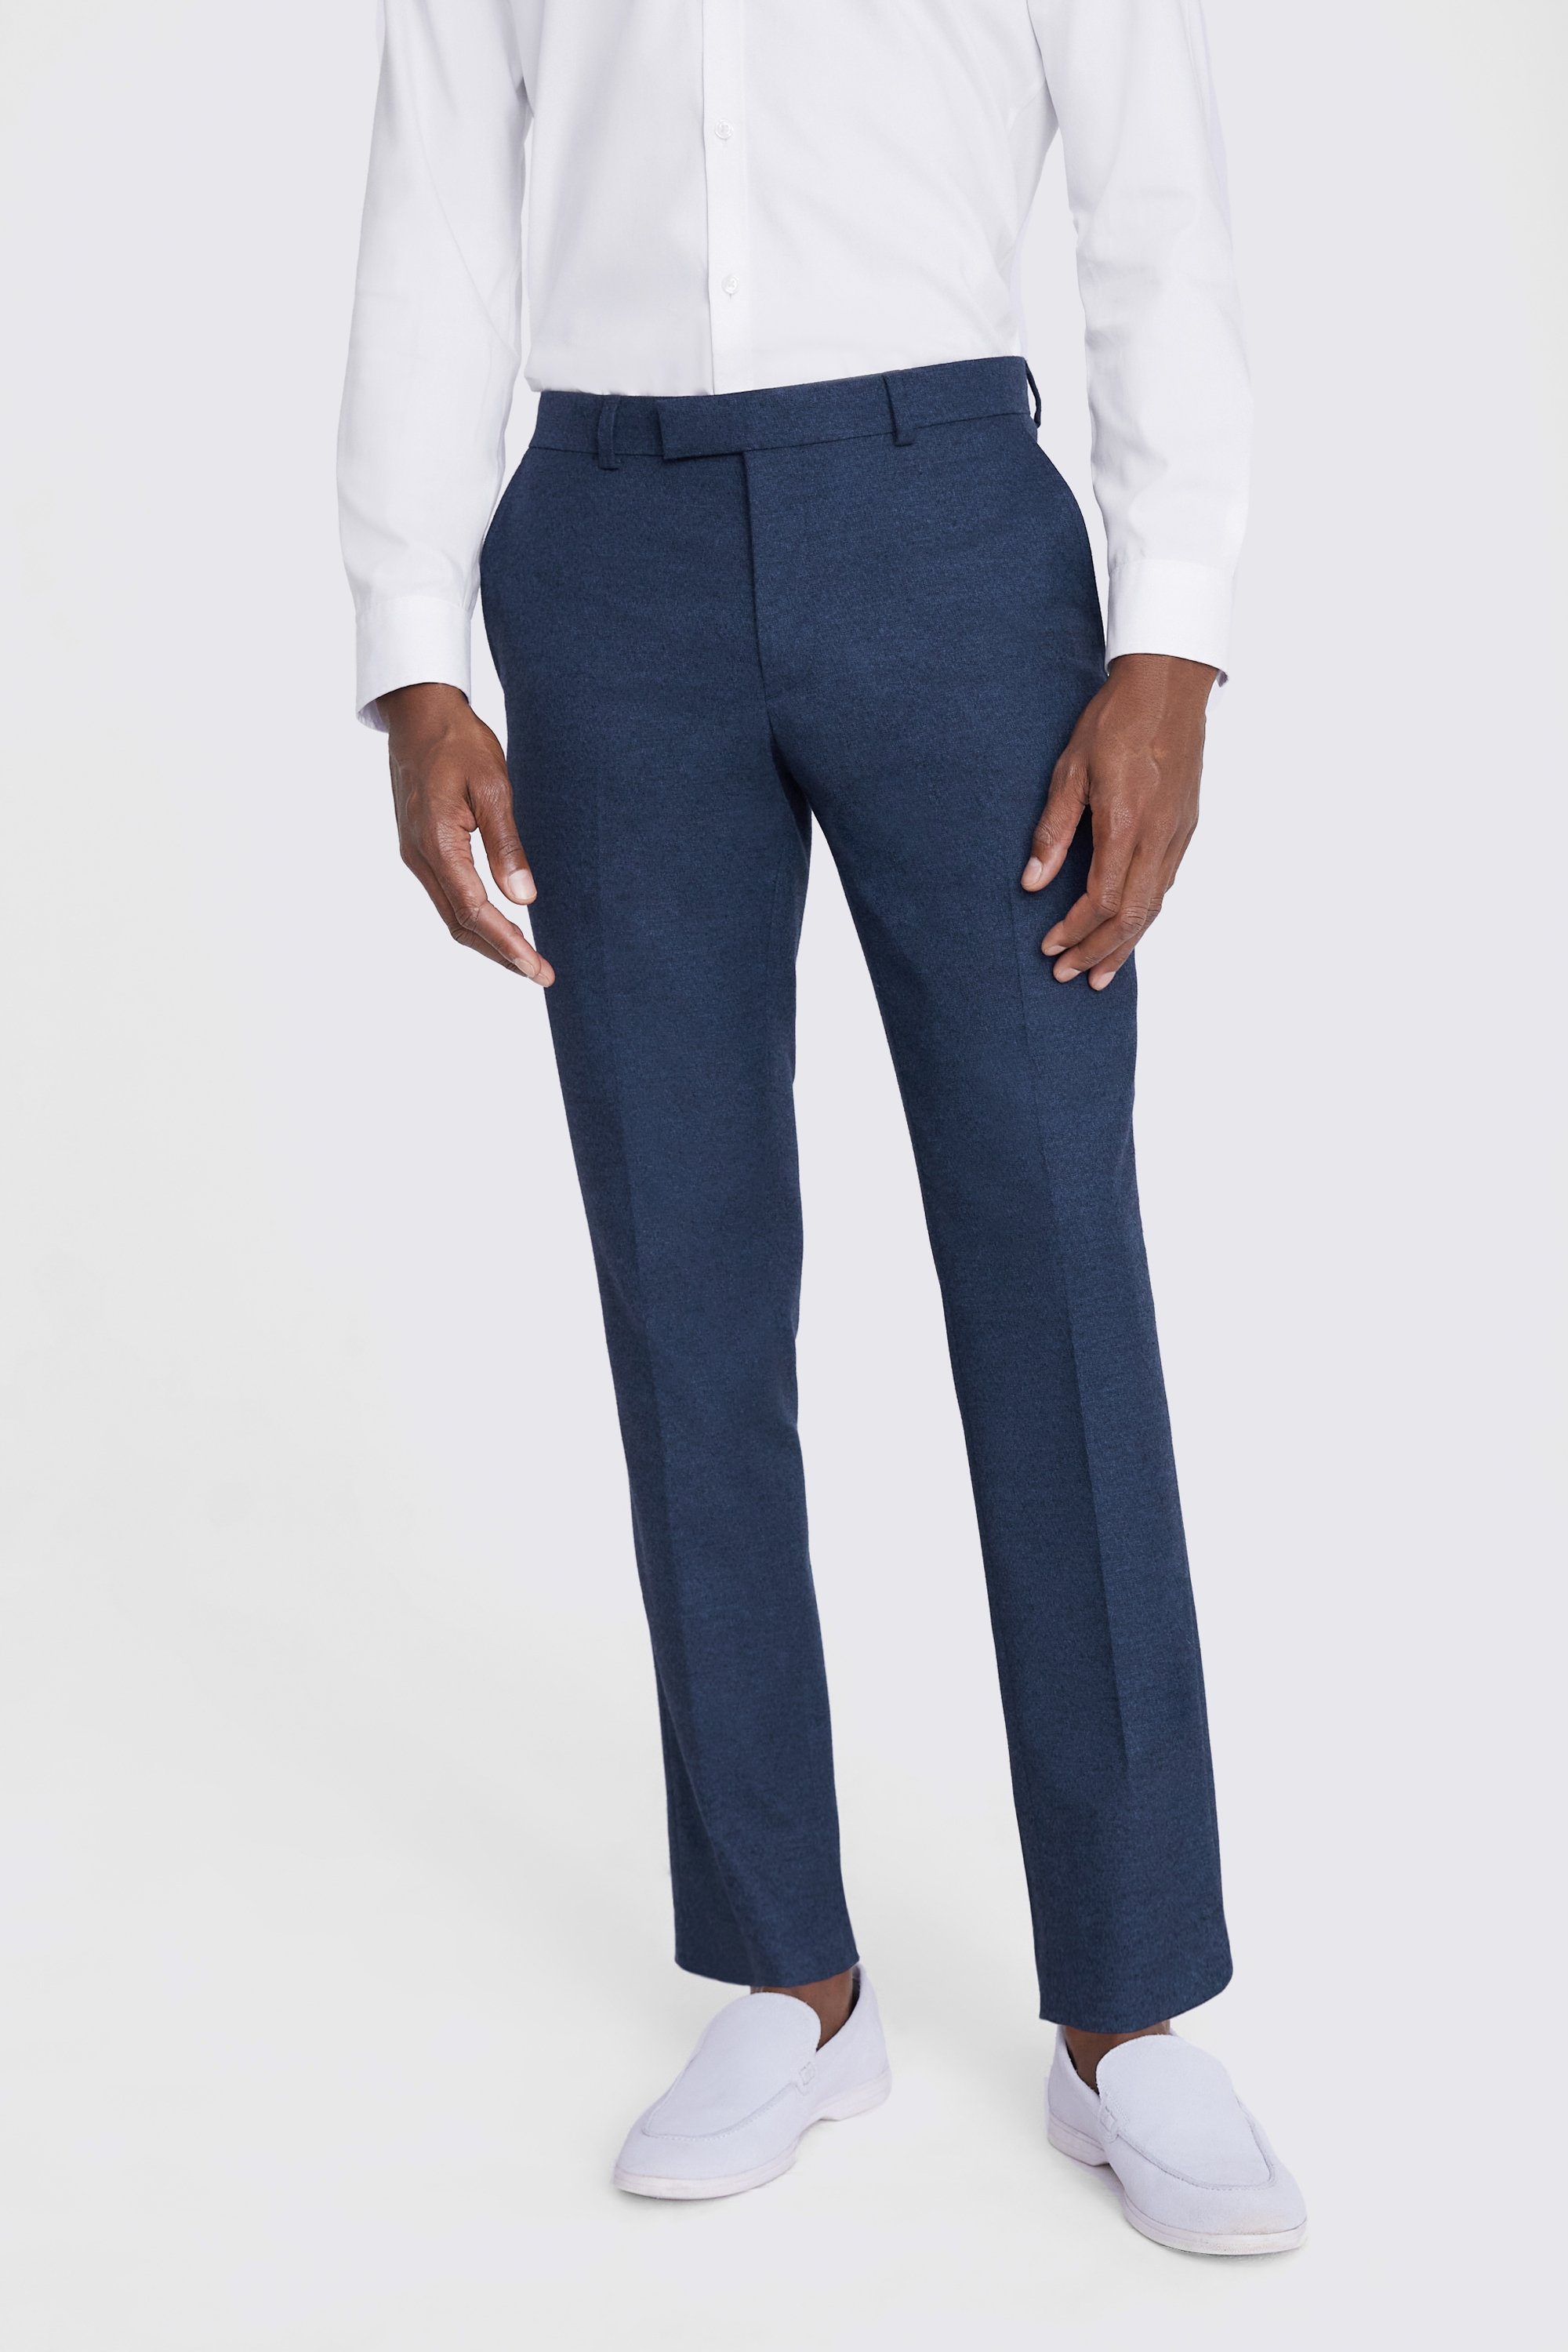 Flannel Trousers in Light Grey  Cad  The Dandy